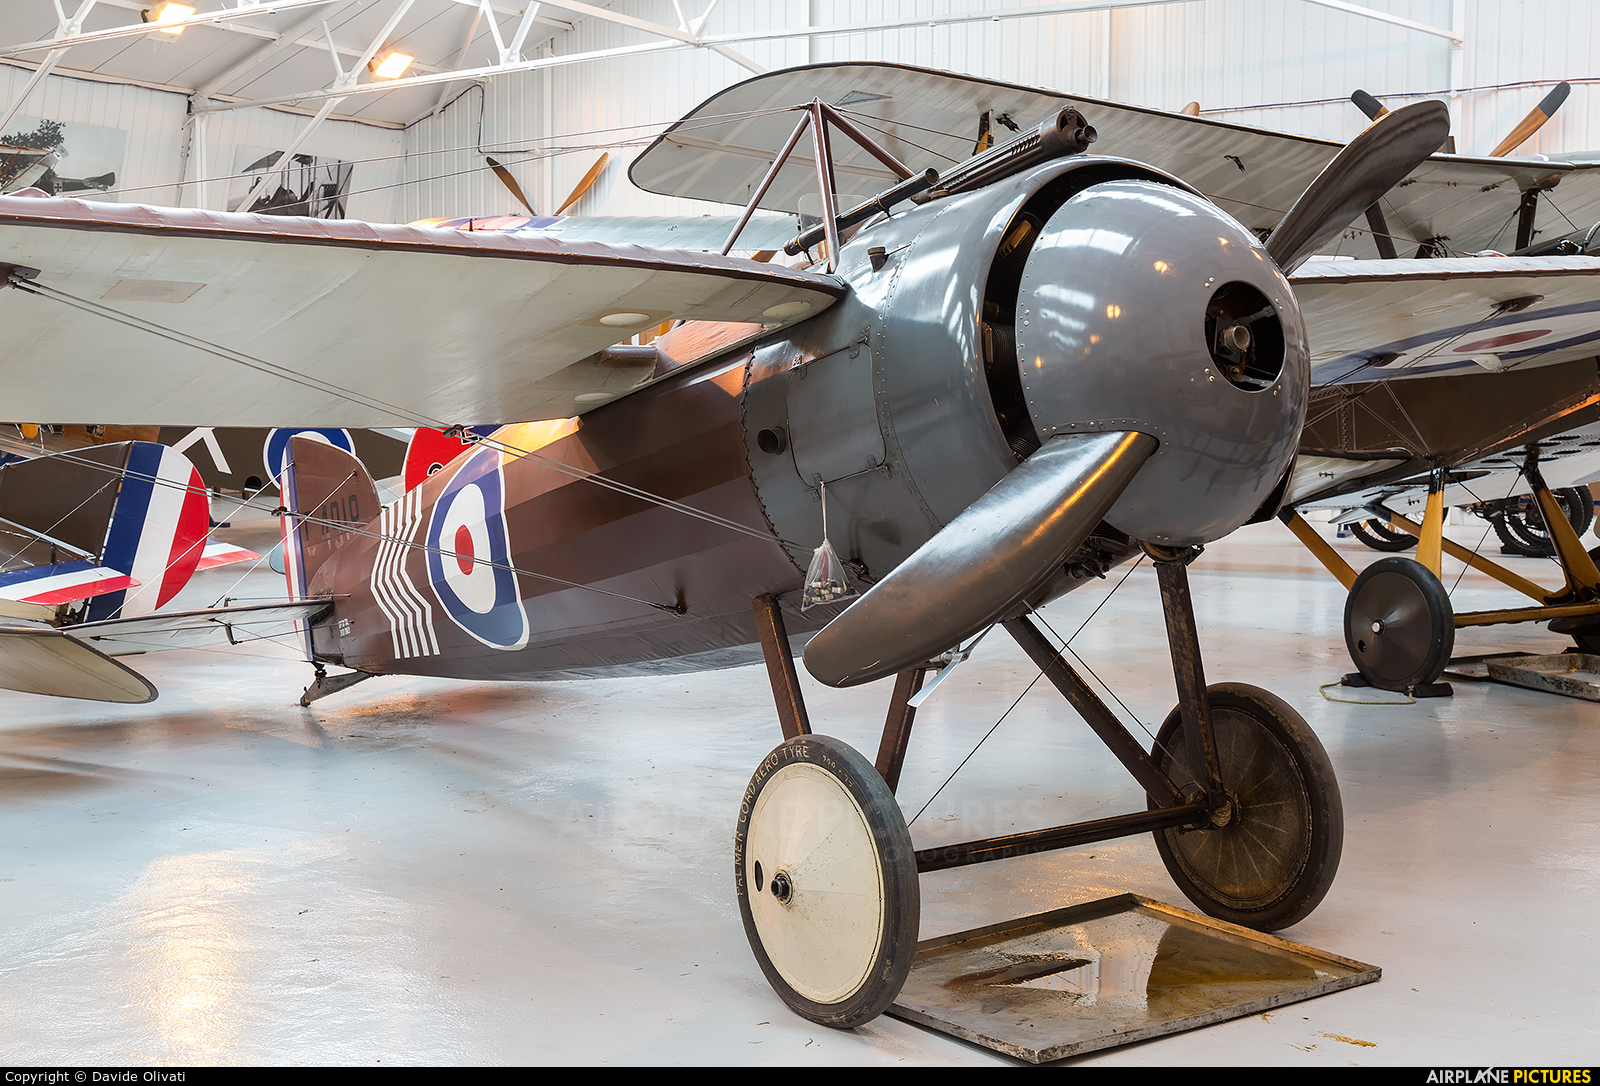 The Shuttleworth Collection G-BWJM aircraft at Old Warden